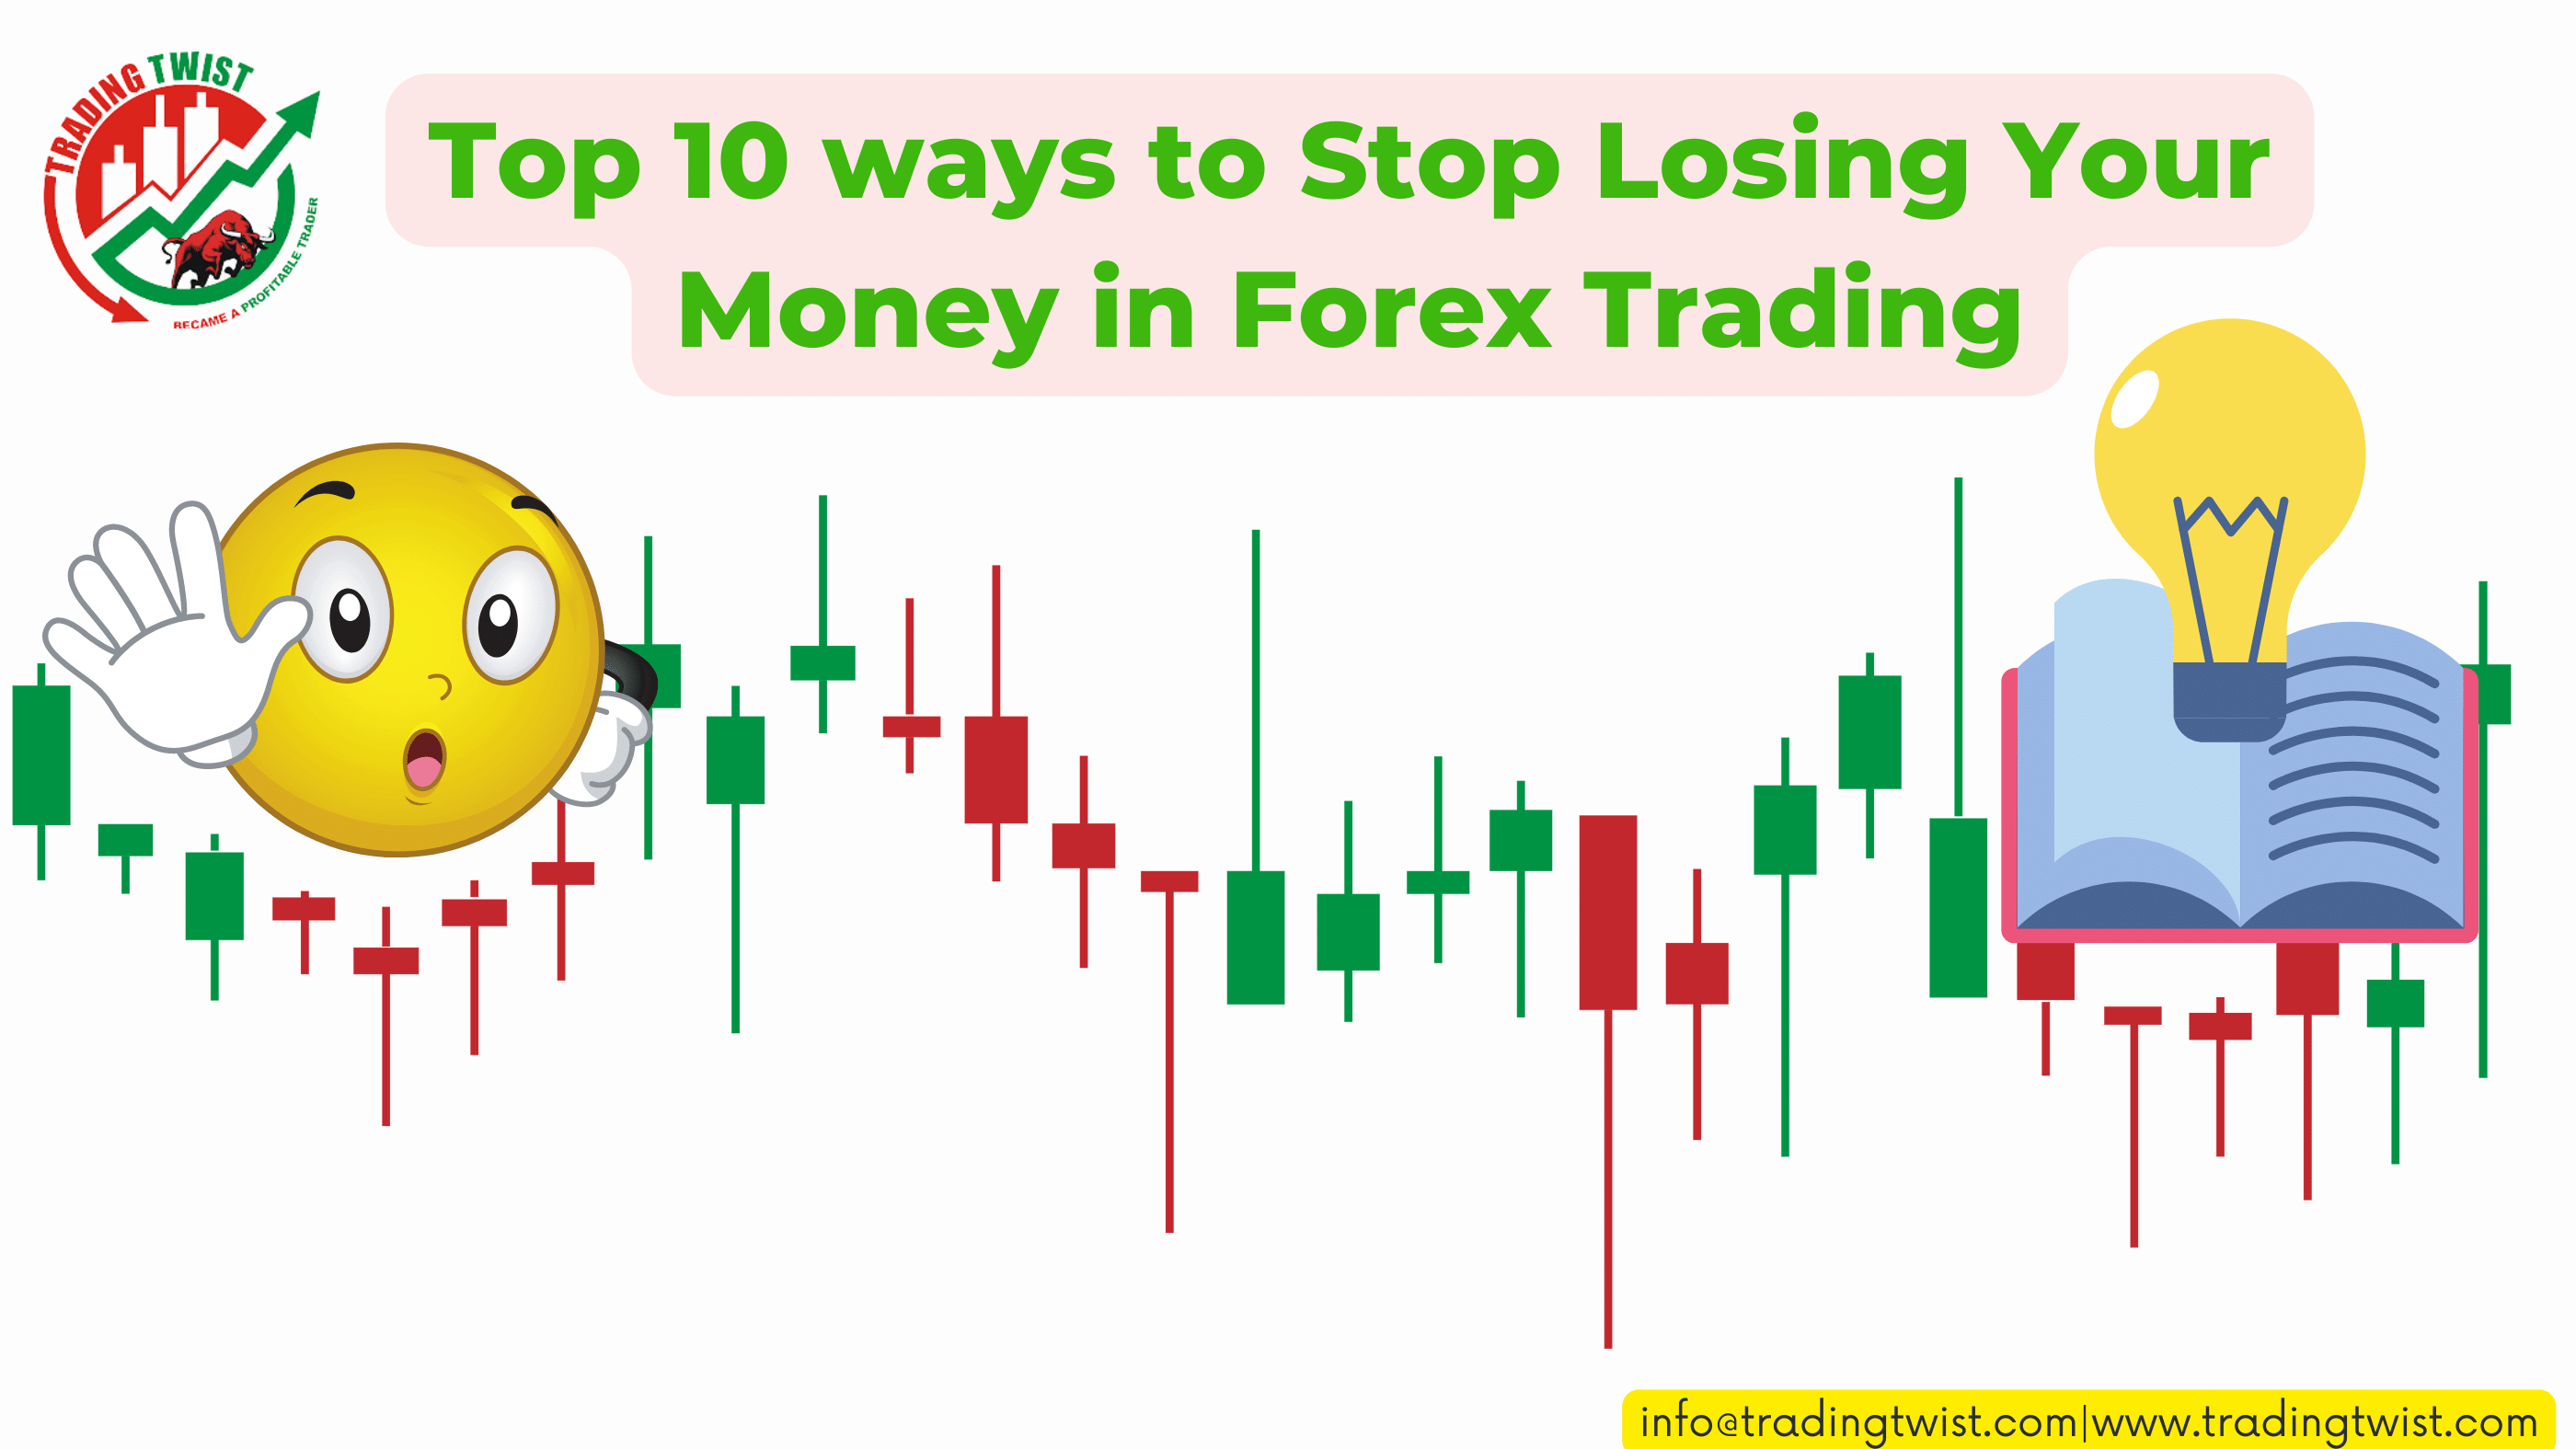 Money in Forex Trading